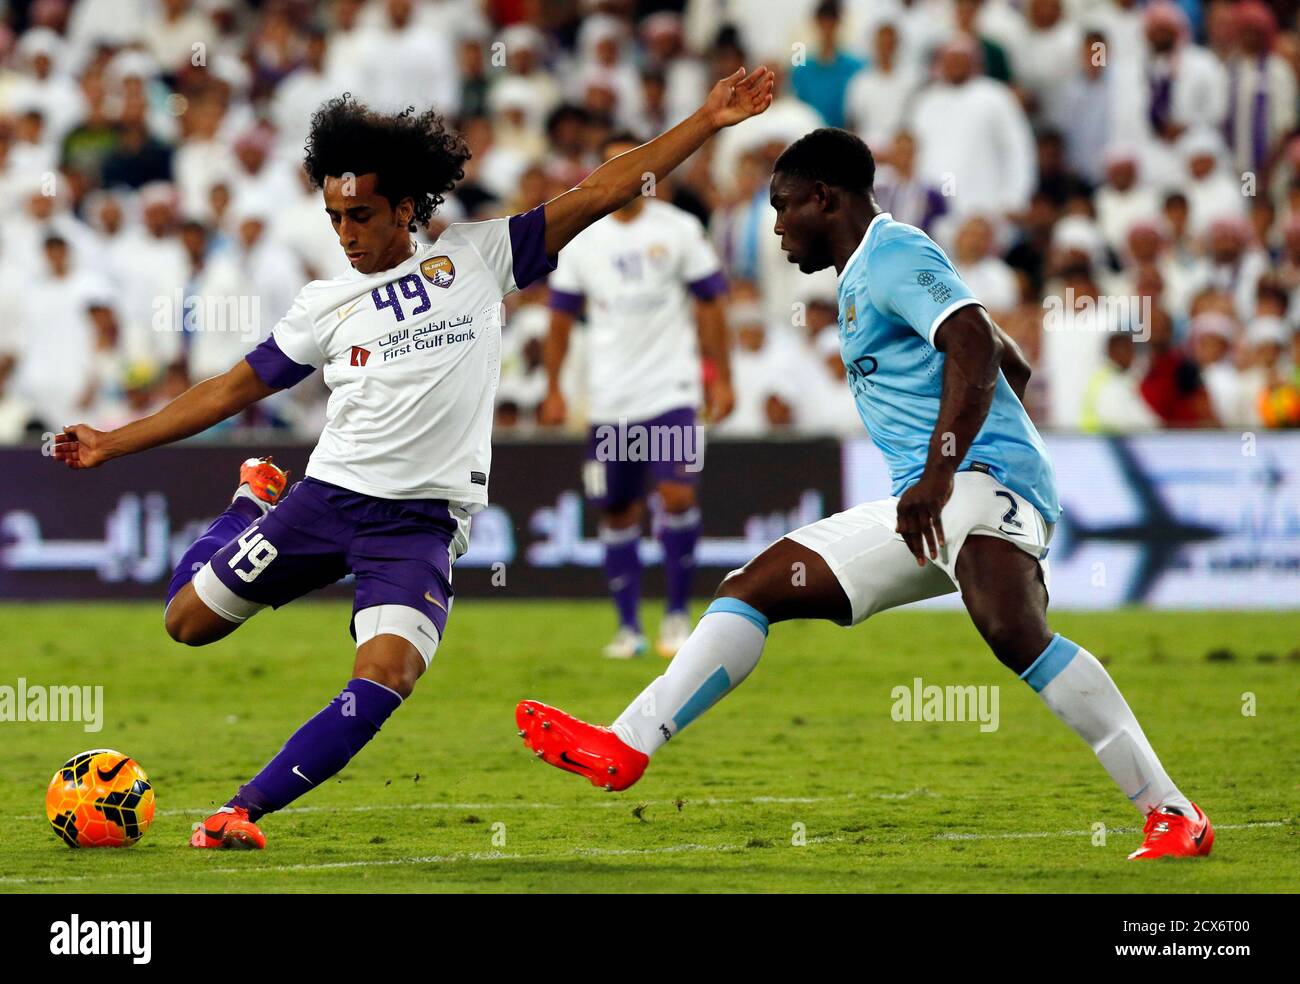 Manchester City's Micah Richards (R) fights for the ball with Al Ain FC's  Adel Gamal during their friendly soccer match at Hazza Bin Zayed Stadium in  Al Ain May 15, 2014. REUTERS/Ahmed